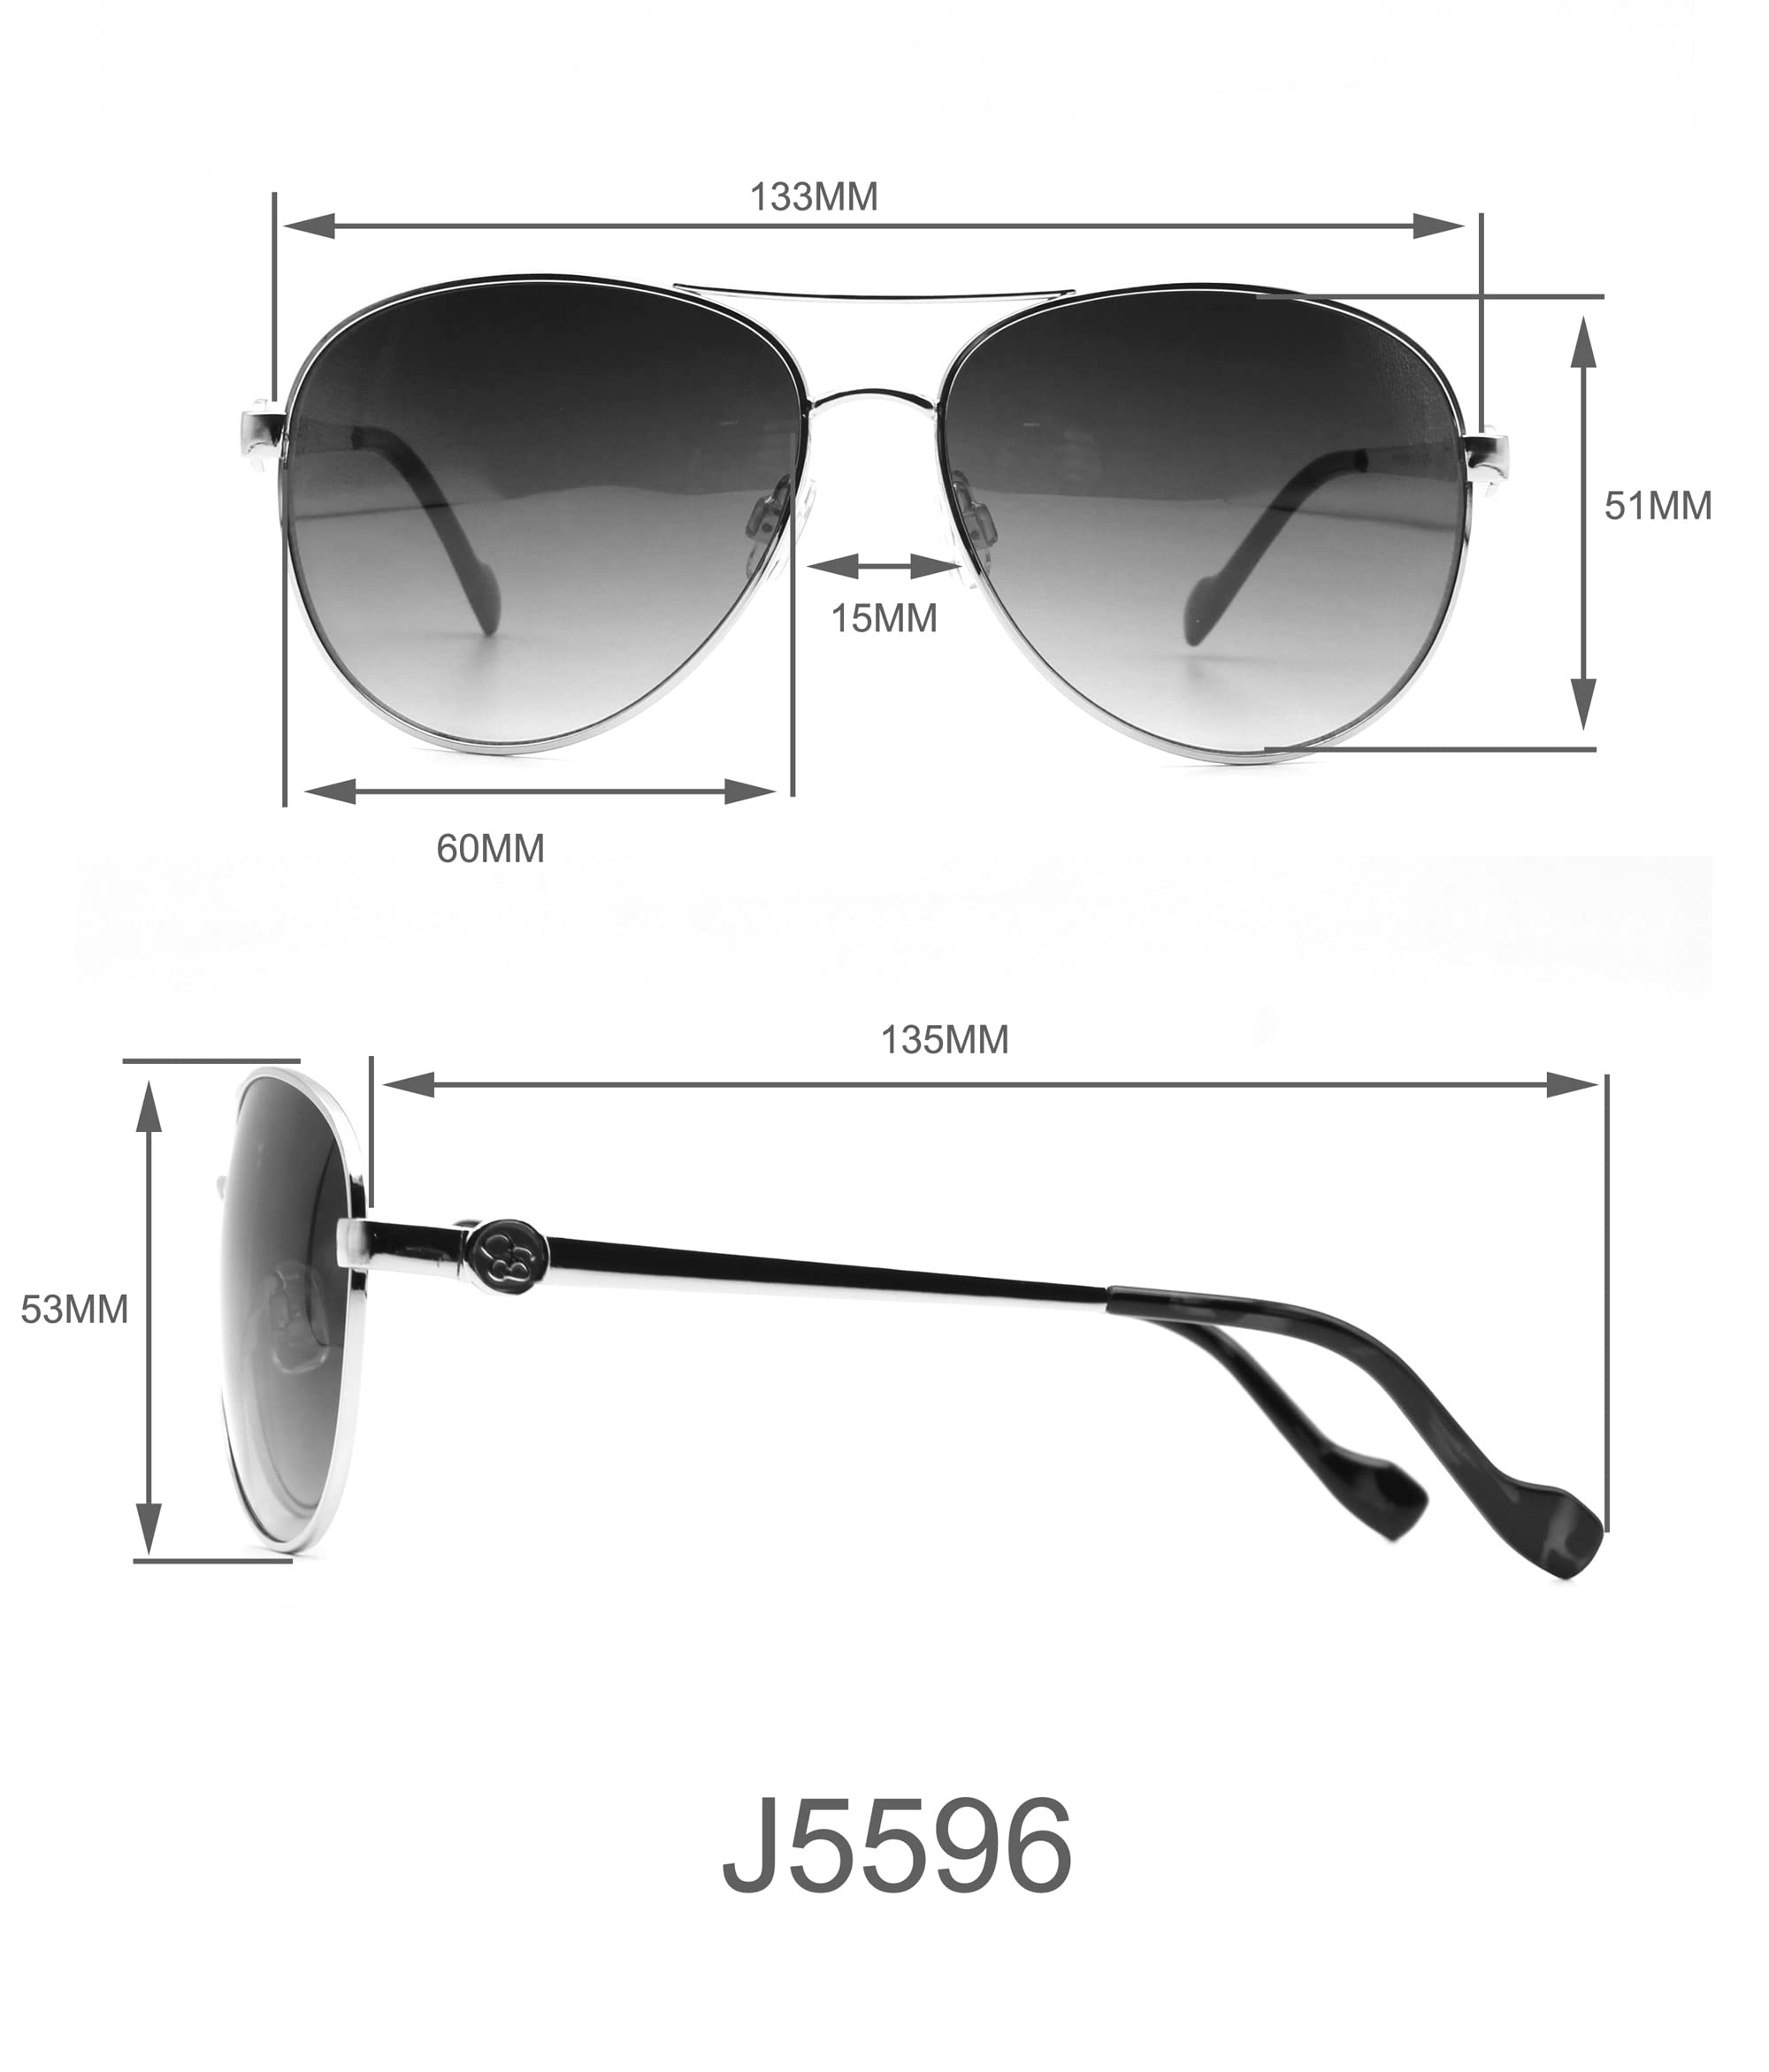 Jessica Simpson J5596 Stylish Women's Metal Aviator Pilot Sunglasses with 100% Uv Protection. Glam Gifts for Her, 60 Mm